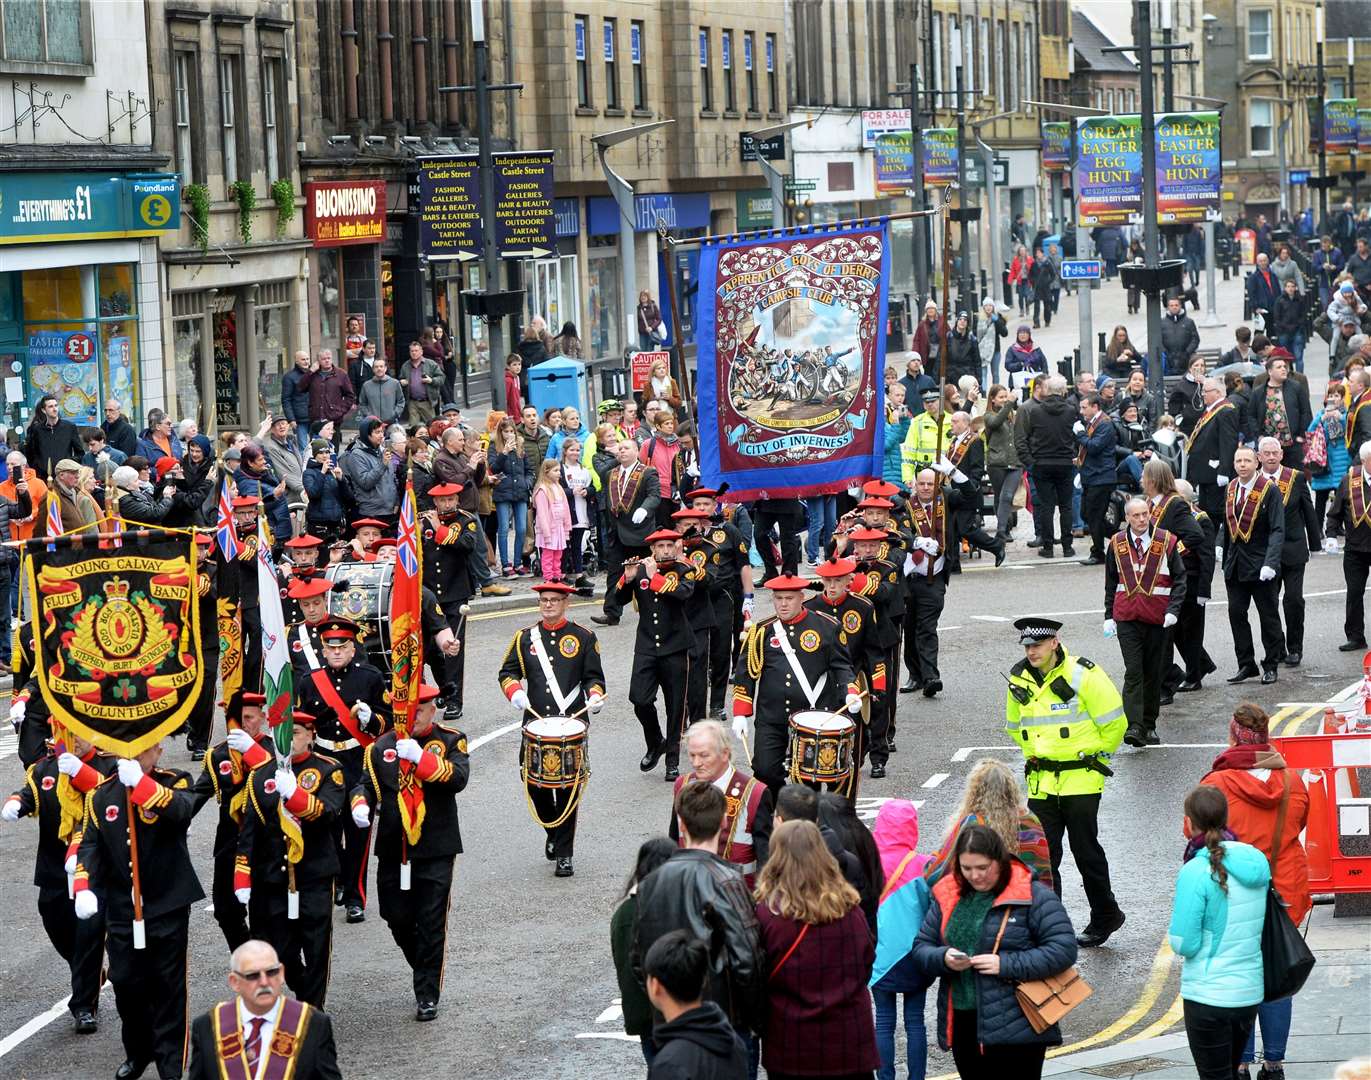 A previous Apprentice Boys of Derry march in Inverness. Picture: Gary Anthony